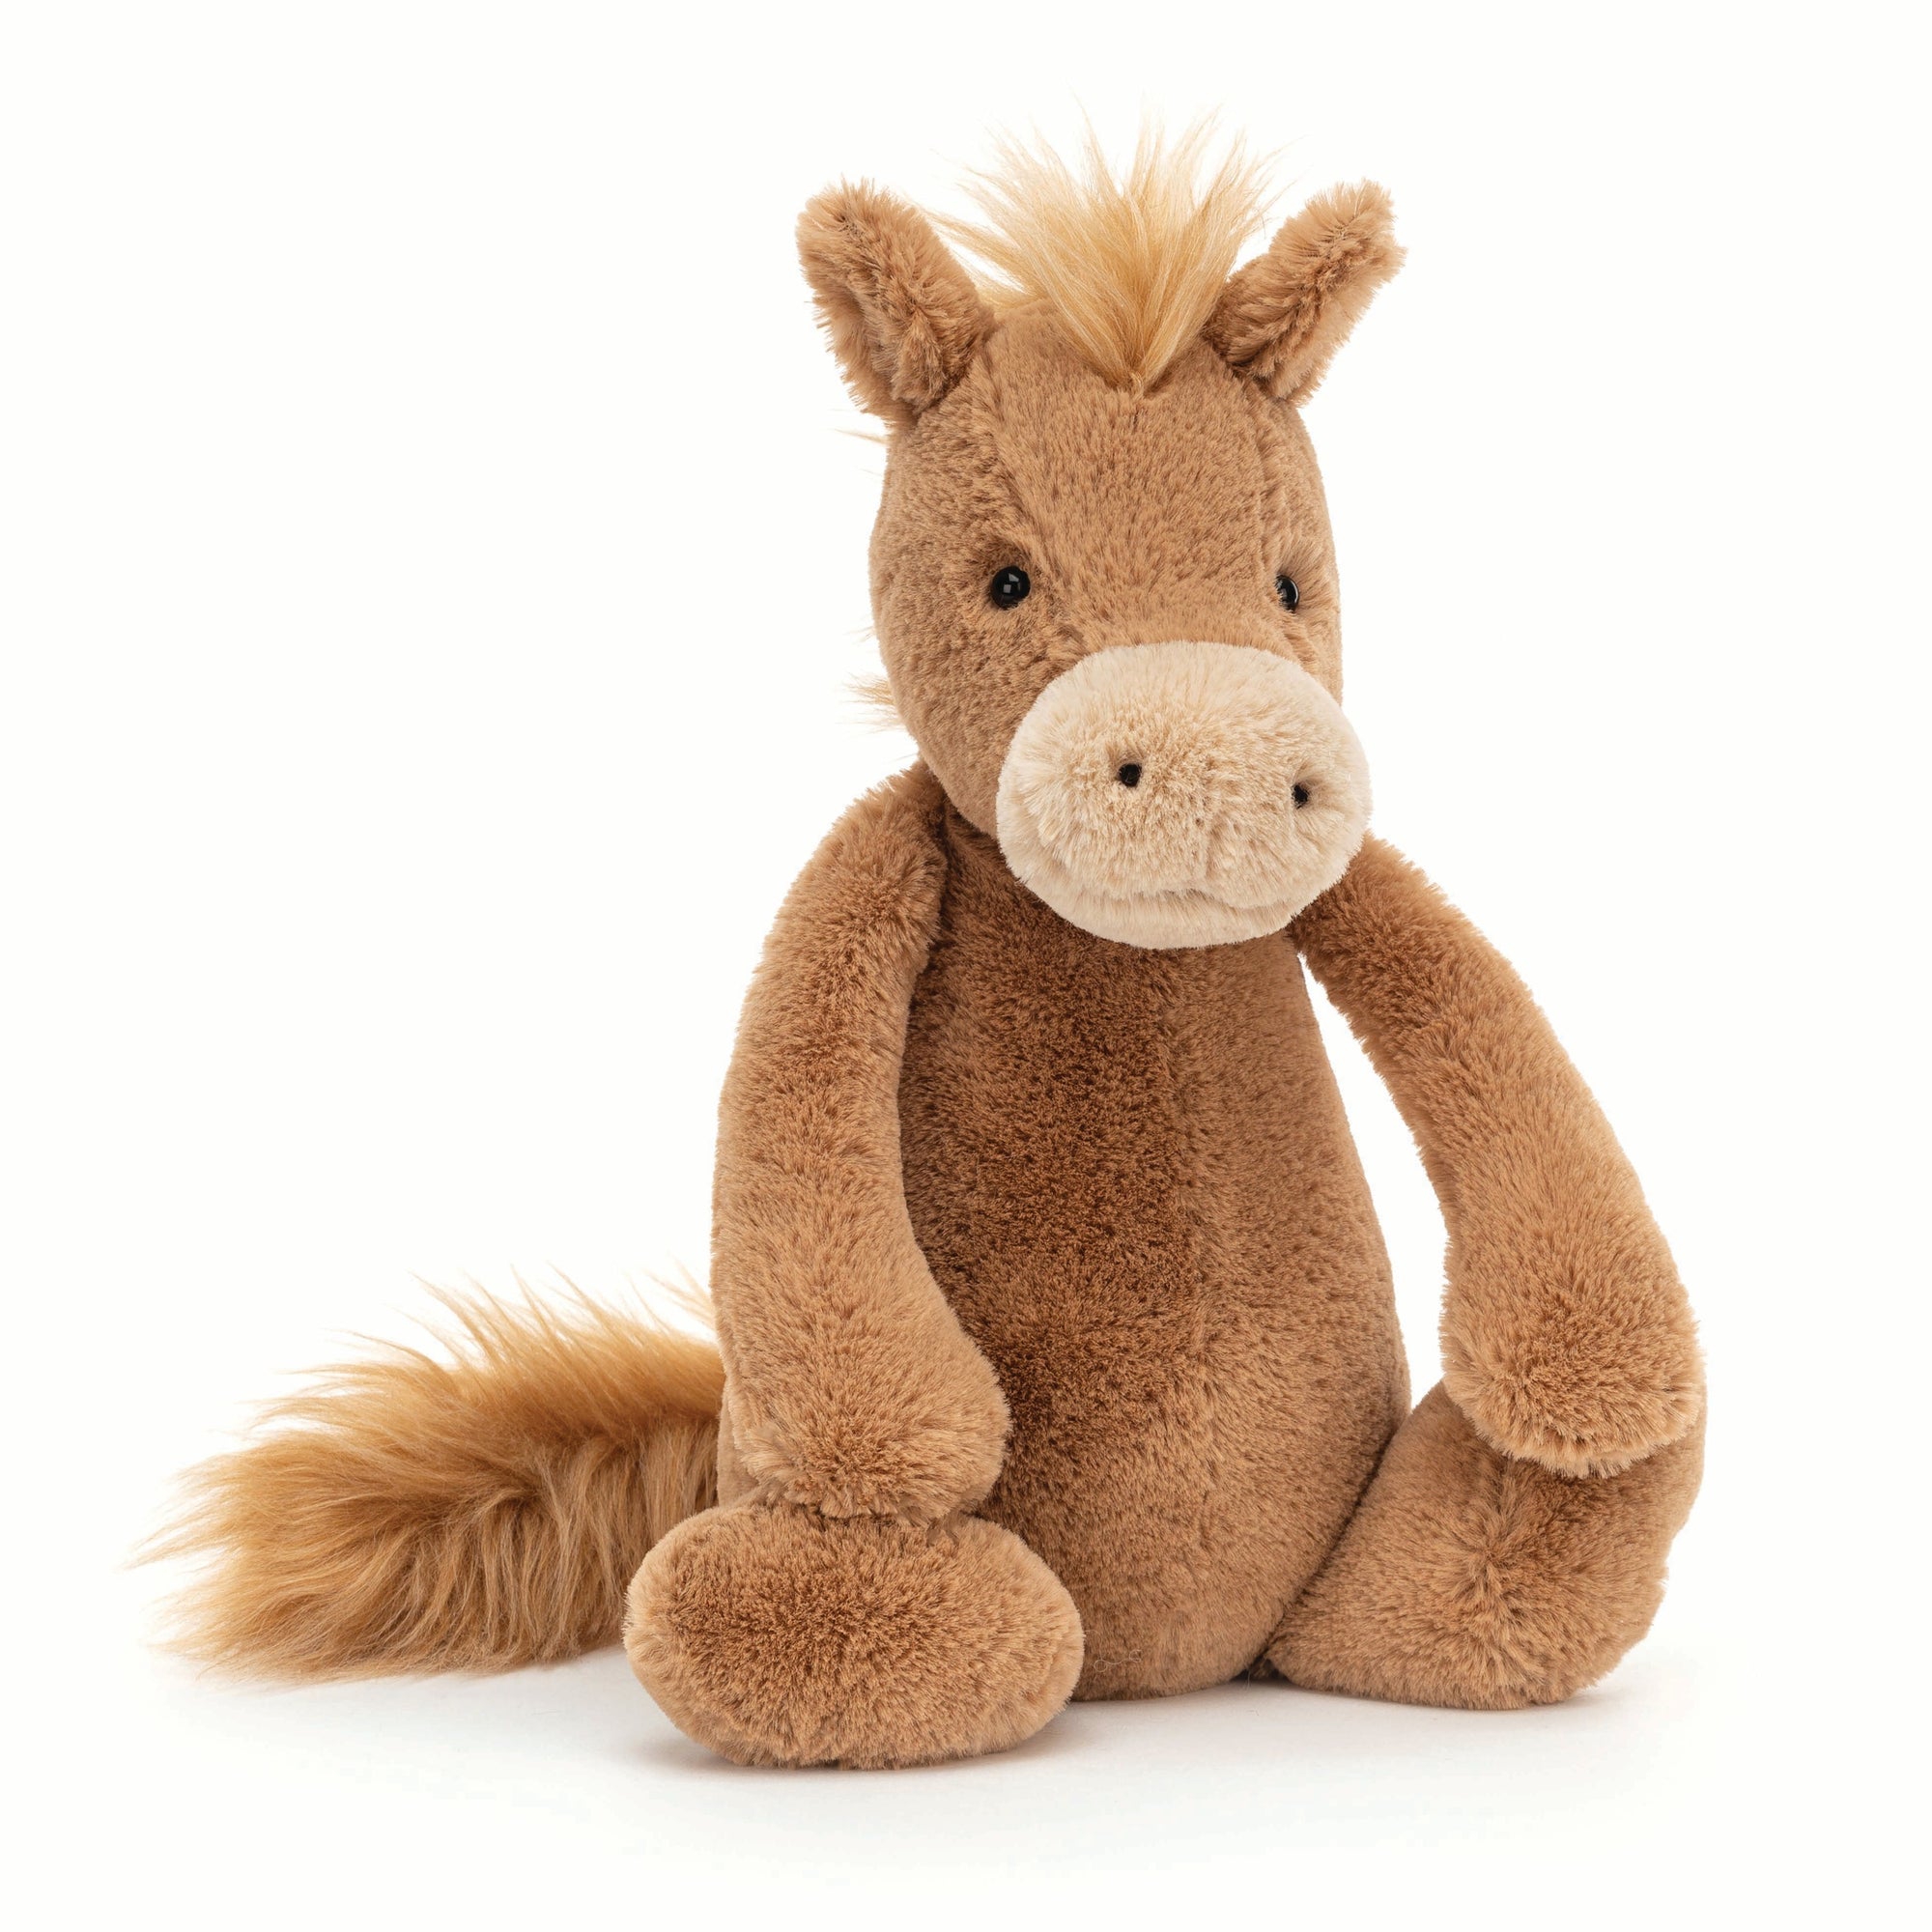 Jellycat pony - angus and dudley